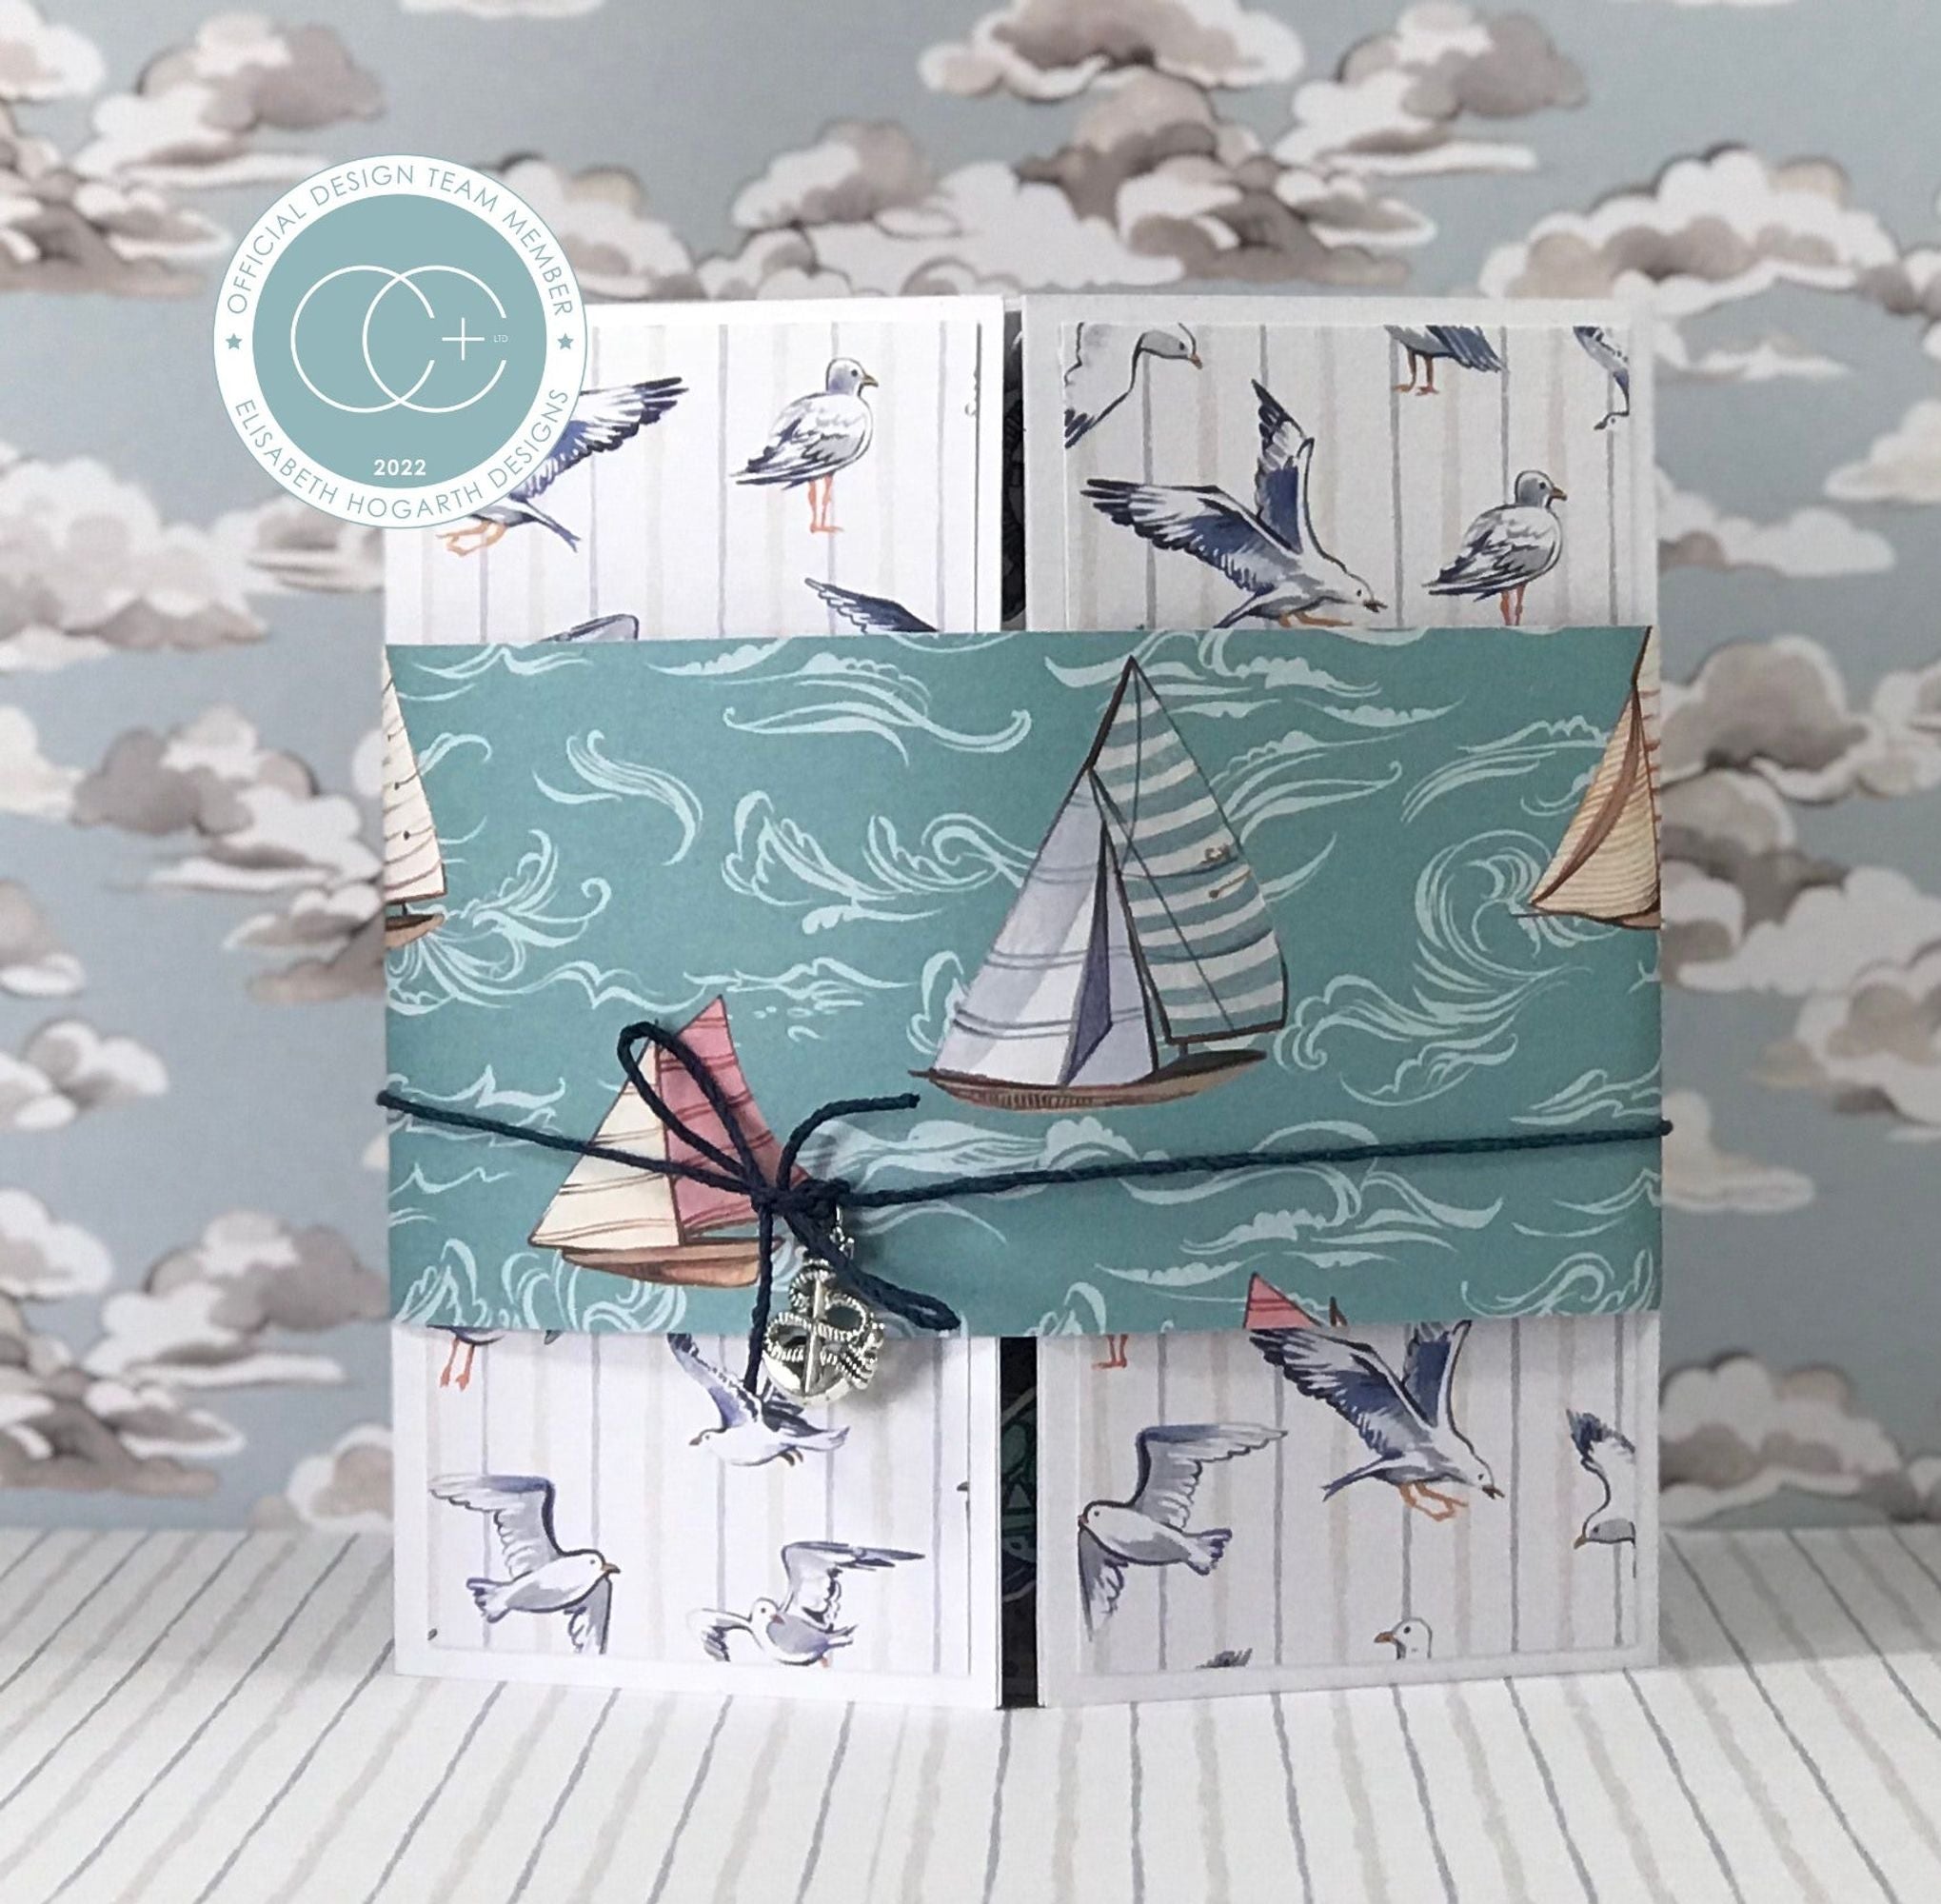 Sea Water Scrapbook Paper 30pc 6x6 Sheets Ocean Crafting Paper for